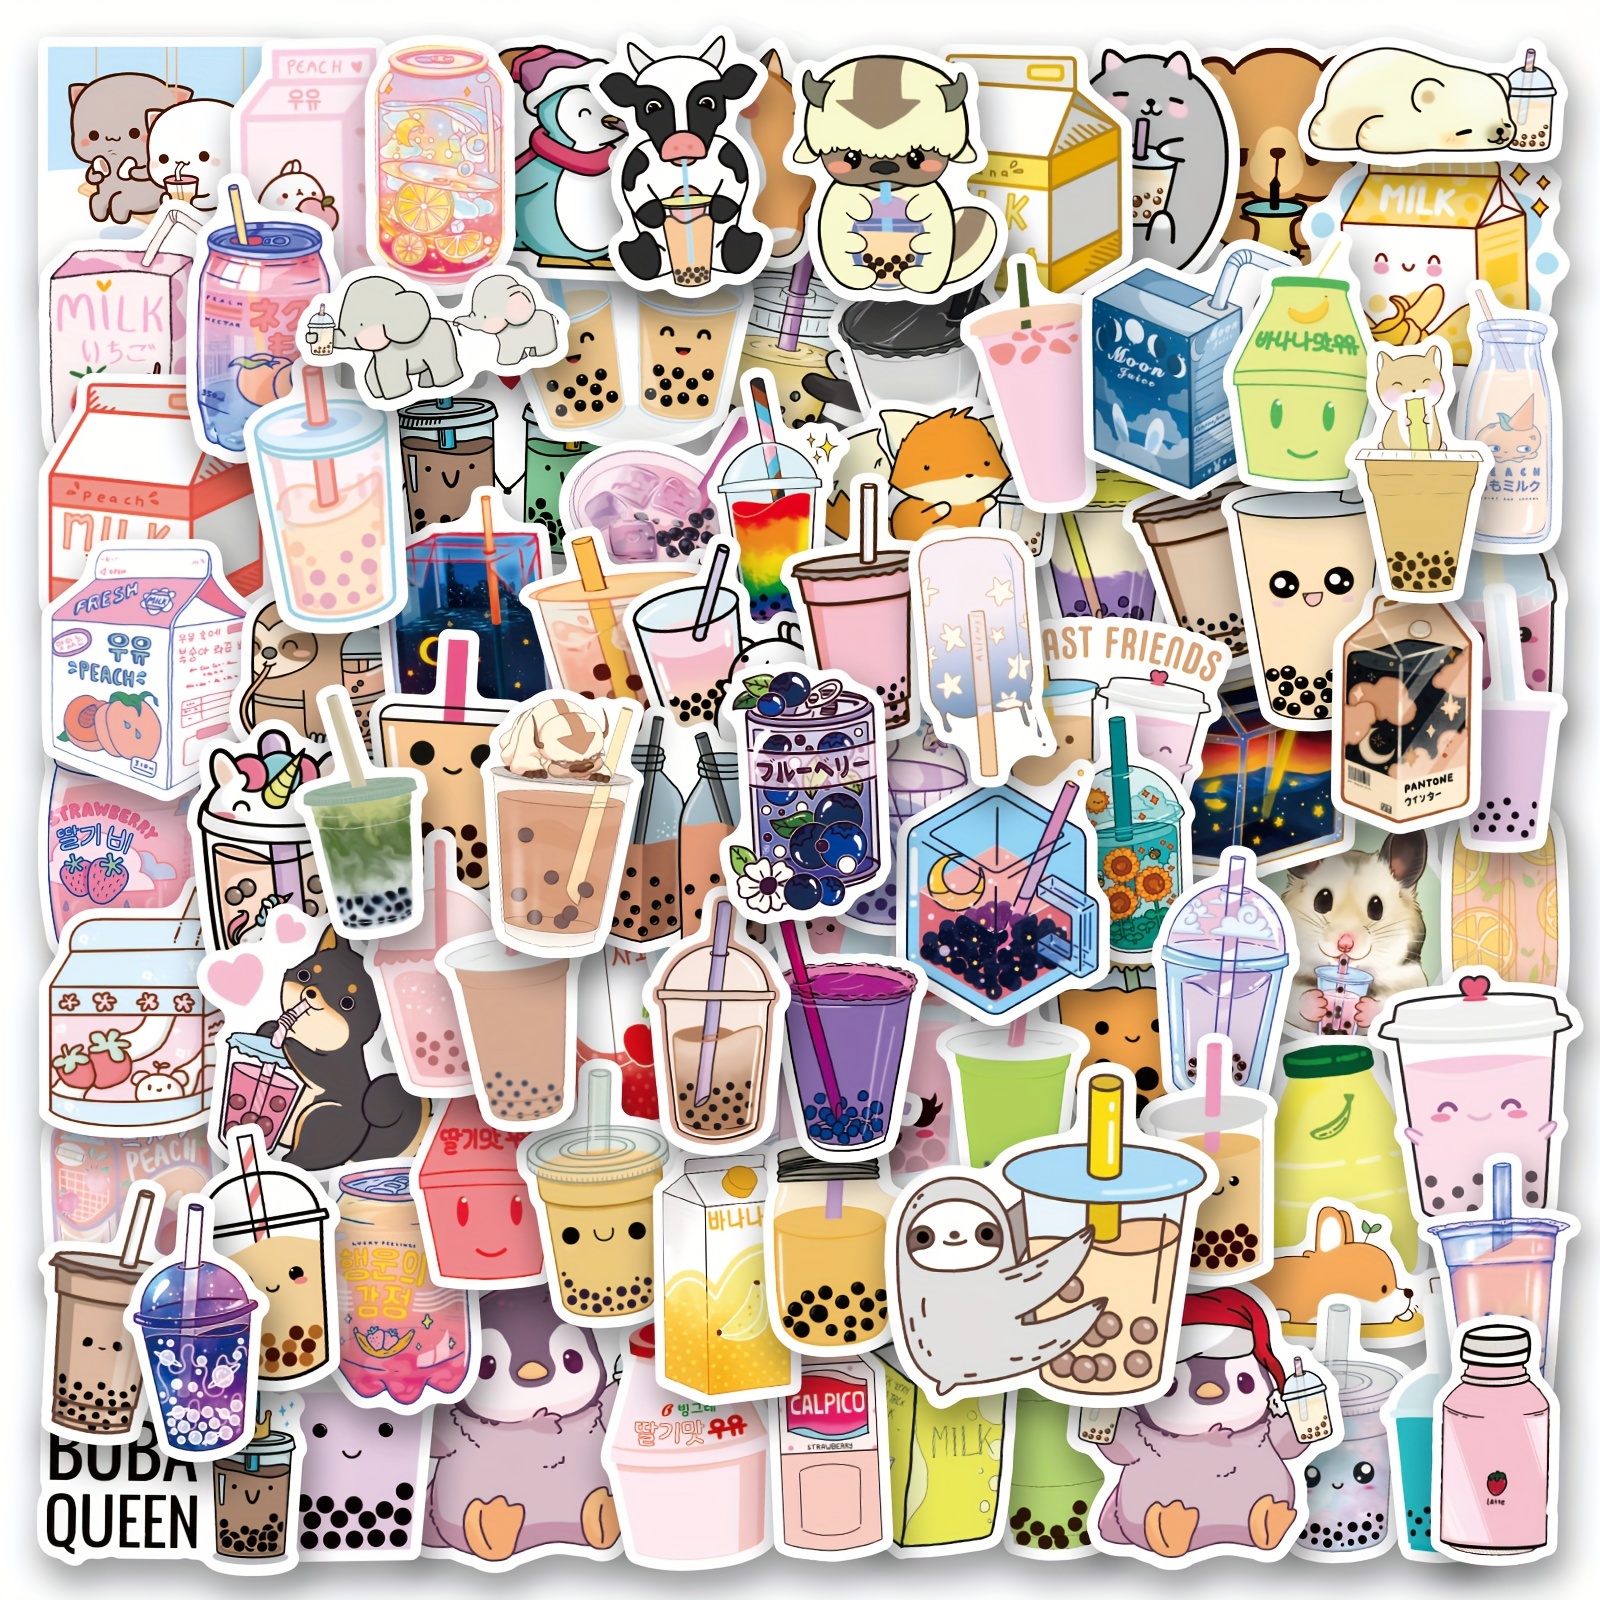 50pcs Boba Tea Stickers Bubble Tea Pearl Milk Tea Stickers, Vinyl Waterproof  Stickers for Laptop,Bumper,Water Bottles,Computer,Phone,Hard hat,Car  Stickers and Decals,Adults Kids Teens for Stickers